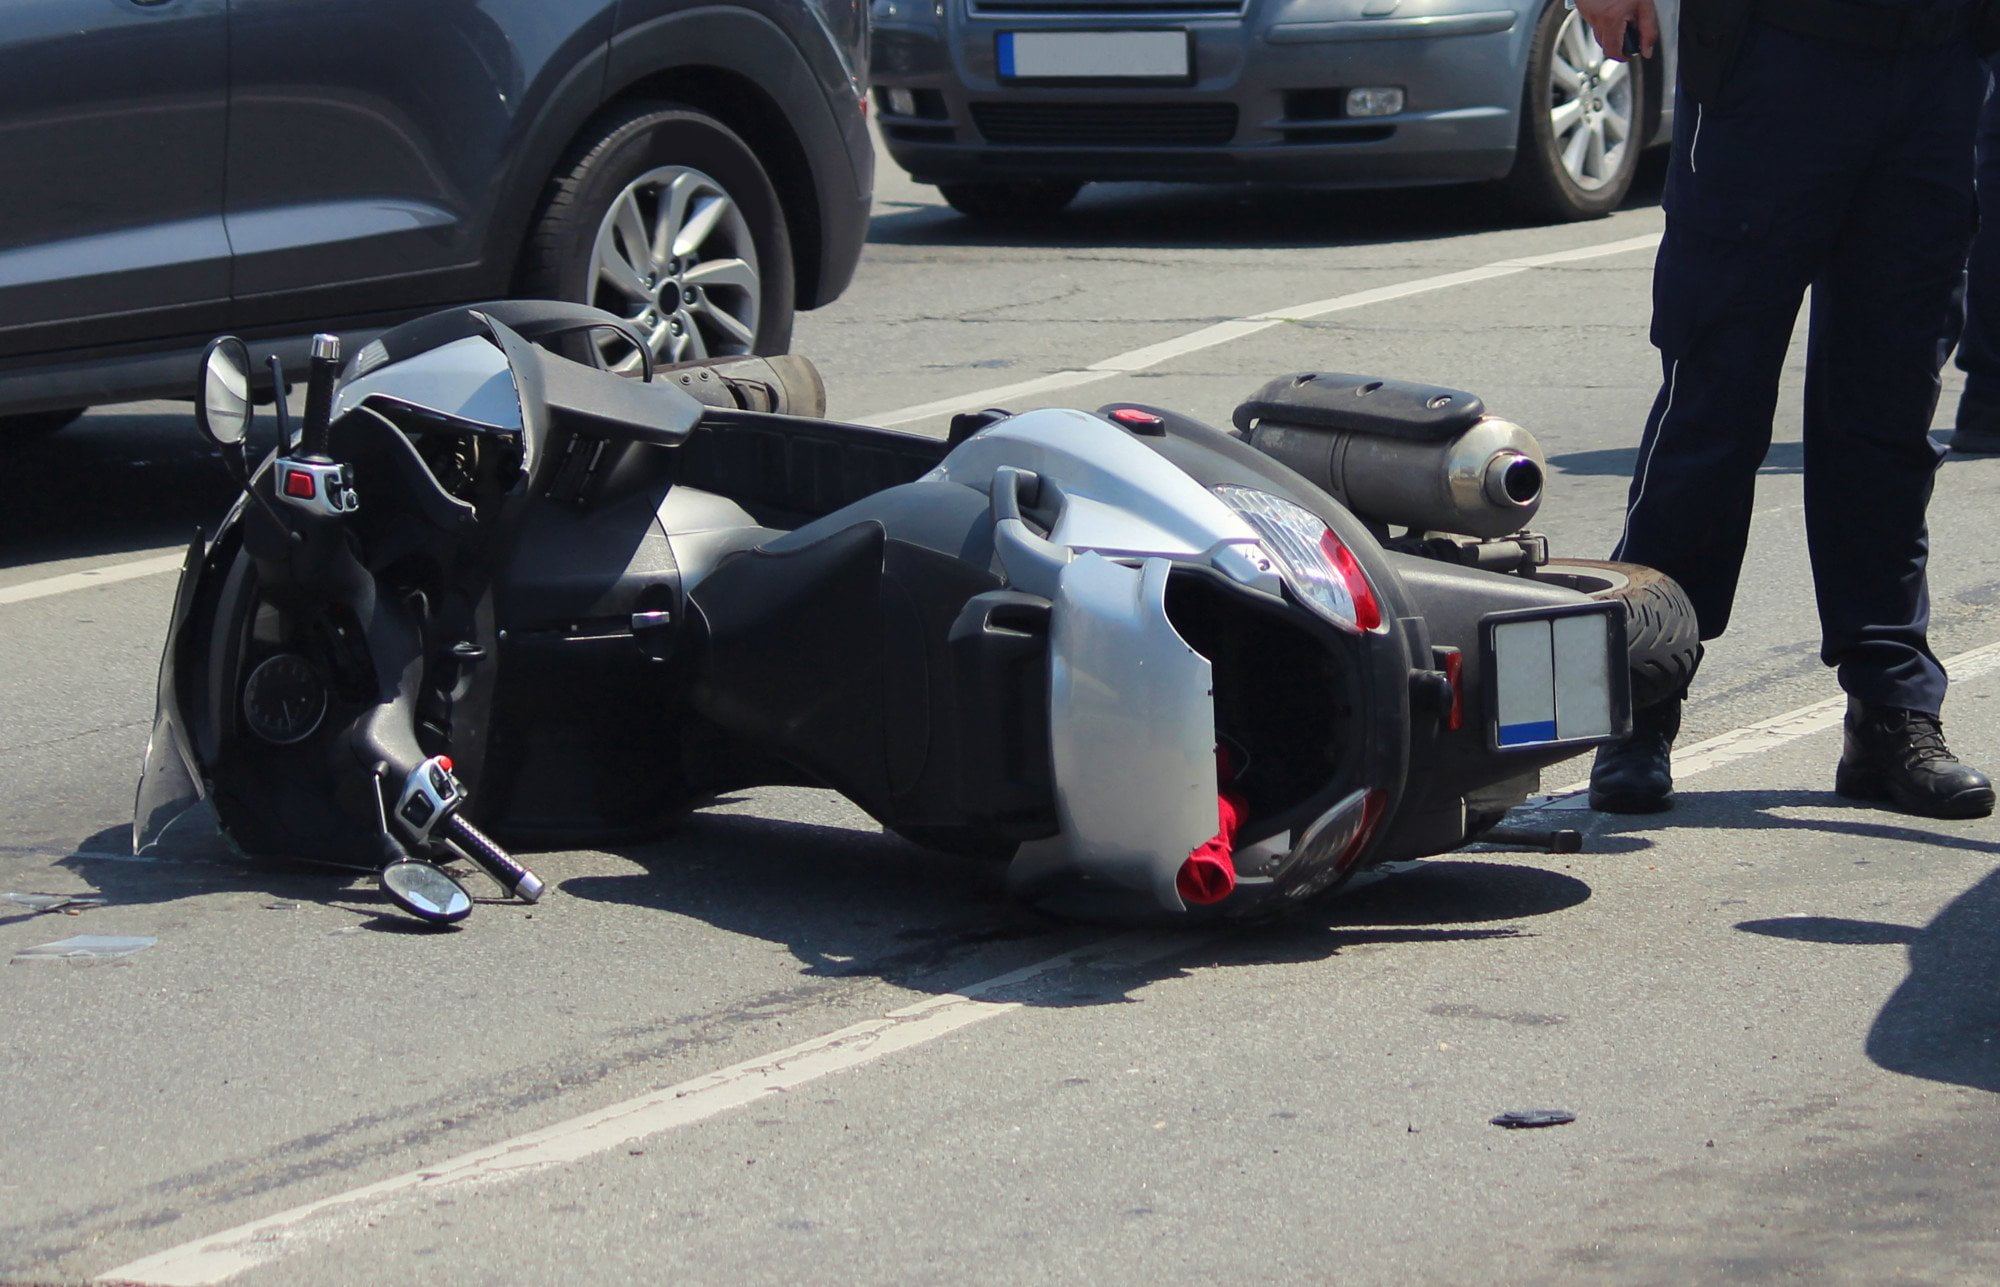 What to Do if You’re Involved in a Recent Motorcycle Accident